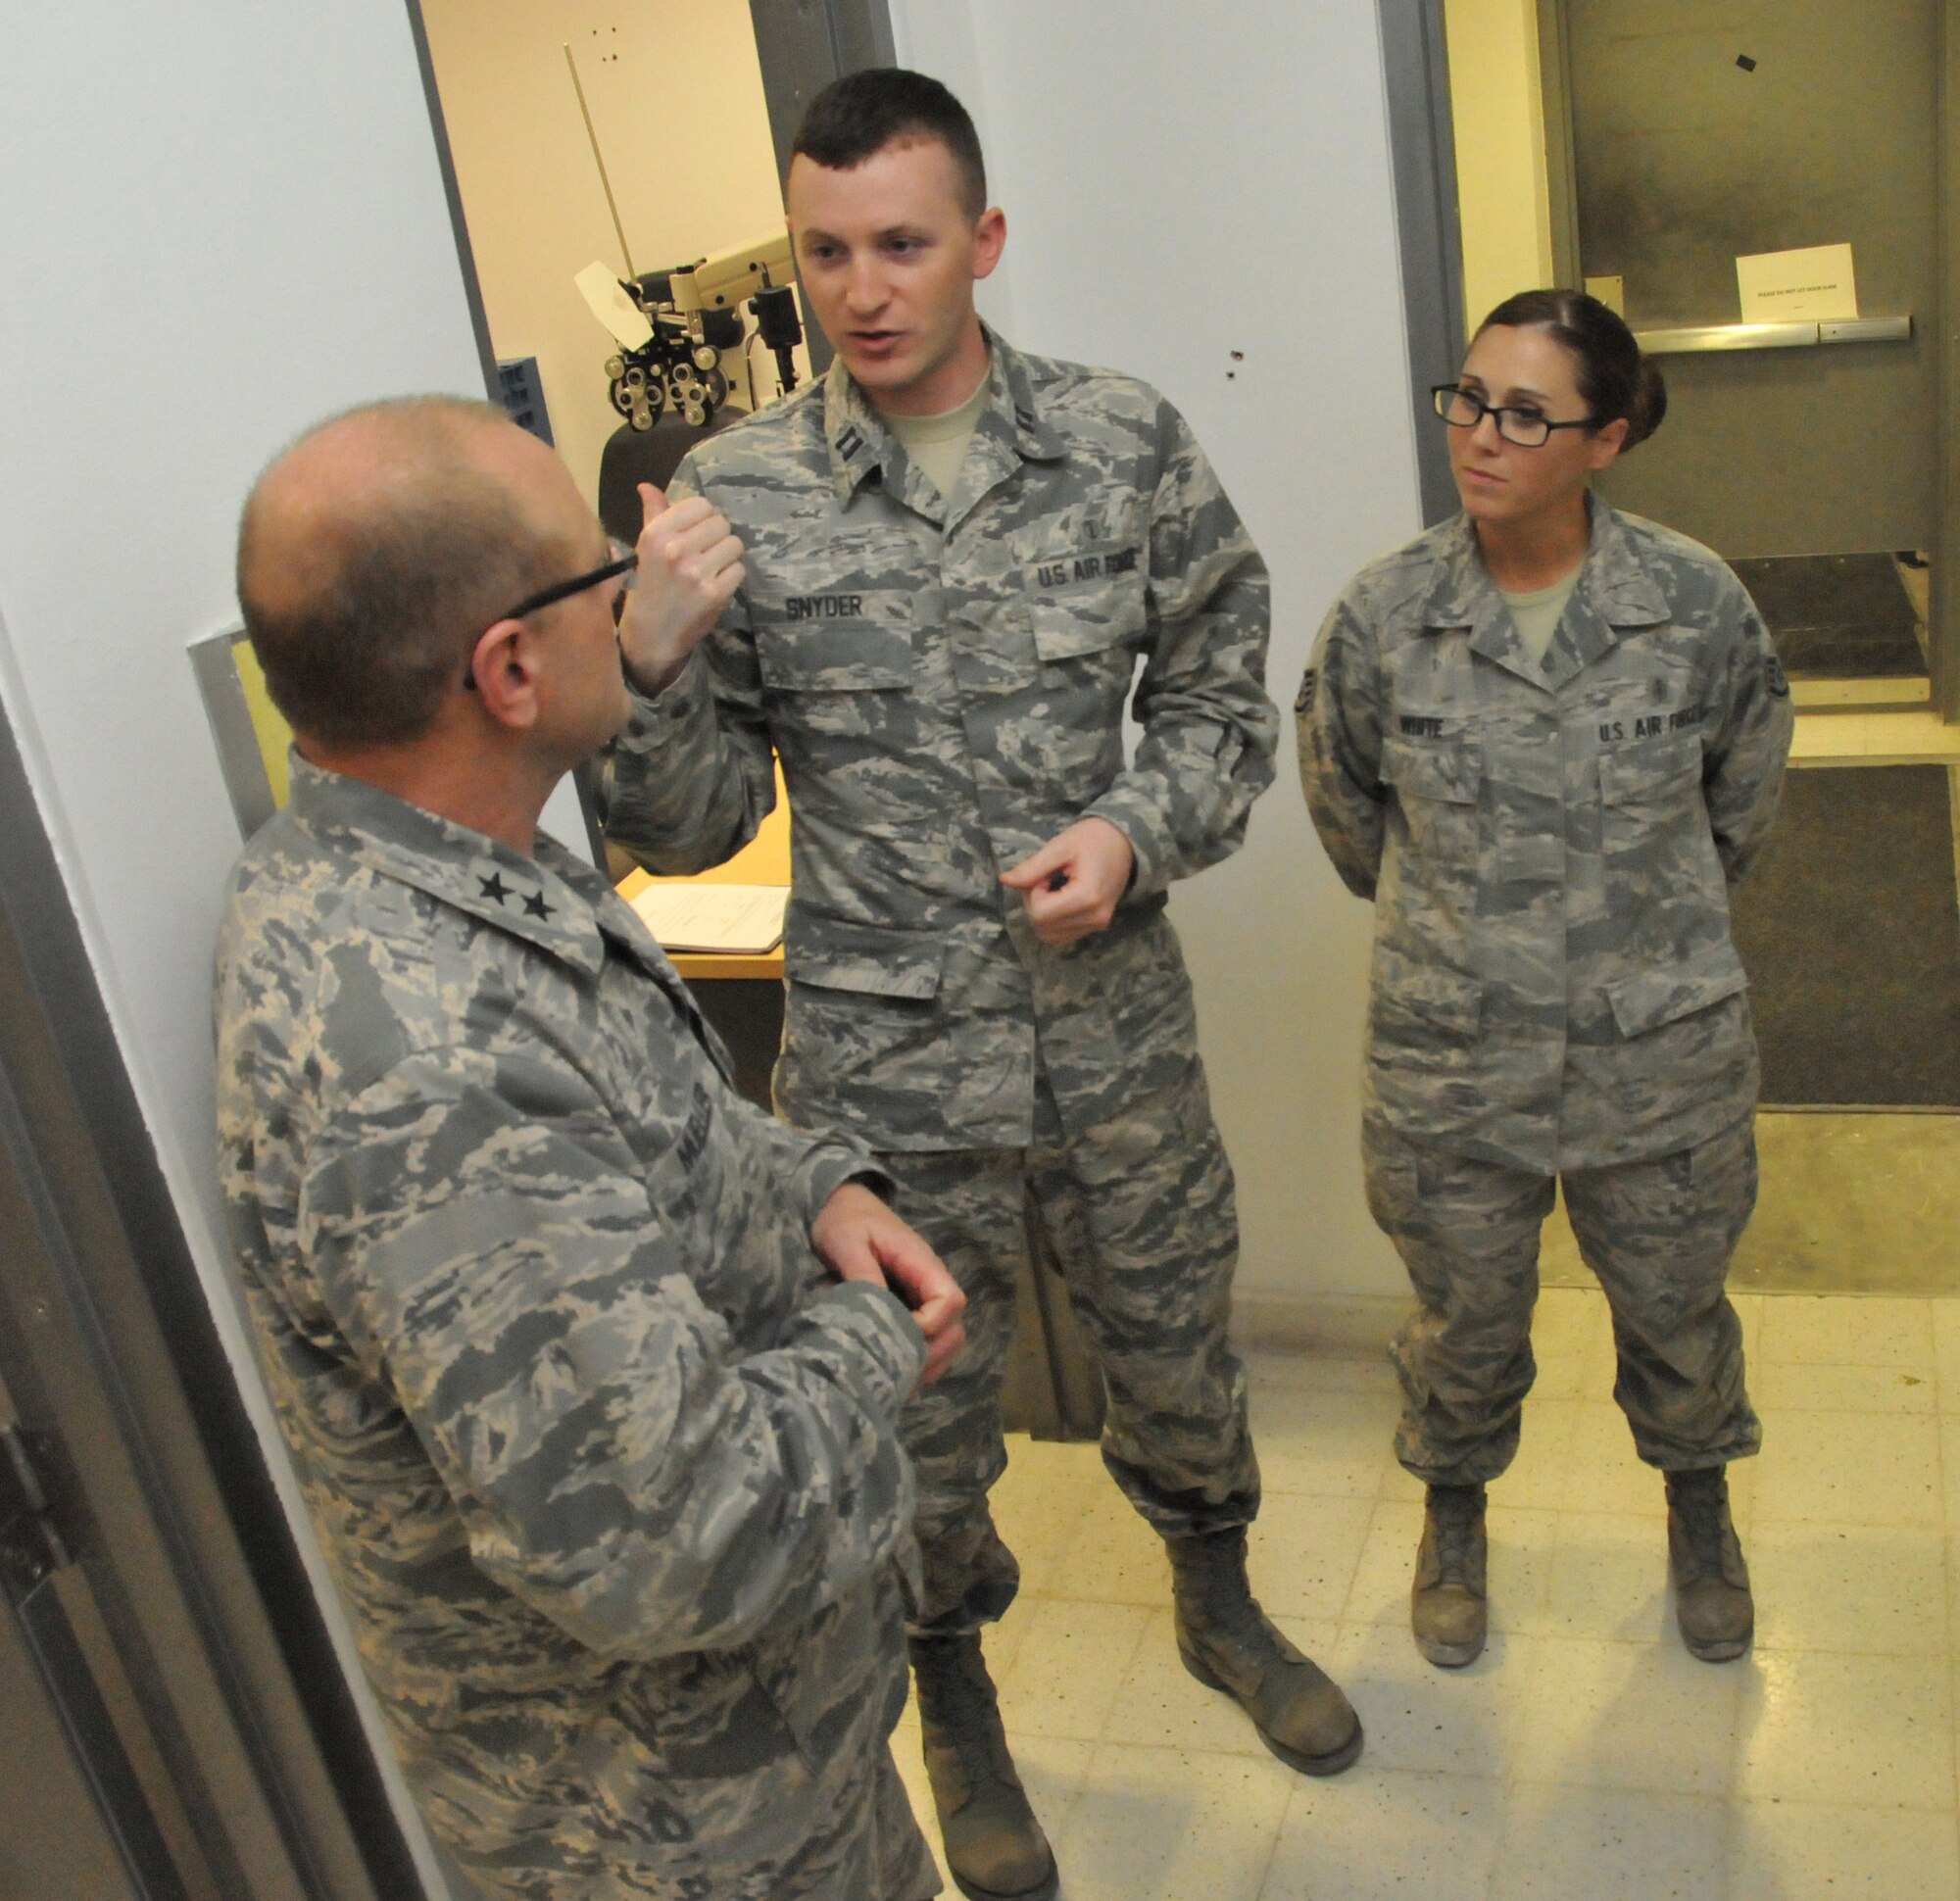 Capt. Benjamin Snyder (middle) and Staff Sgt. Jennifer White (right), 379th Expeditionary Medical Operations Squadron optometrists, speak with Maj. Gen. Andrew Mueller (left), Air Force Chief of Safety, about the laser exposure program March 16 at Al Udeid Air Base, Qatar. Snyder and White coordinate with flight medicine members as well as educate base personnel on laser exposure prevention and treatment procedures. (U.S. Air Force photo by Tech. Sgt. Terrica Y. Jones/Released)